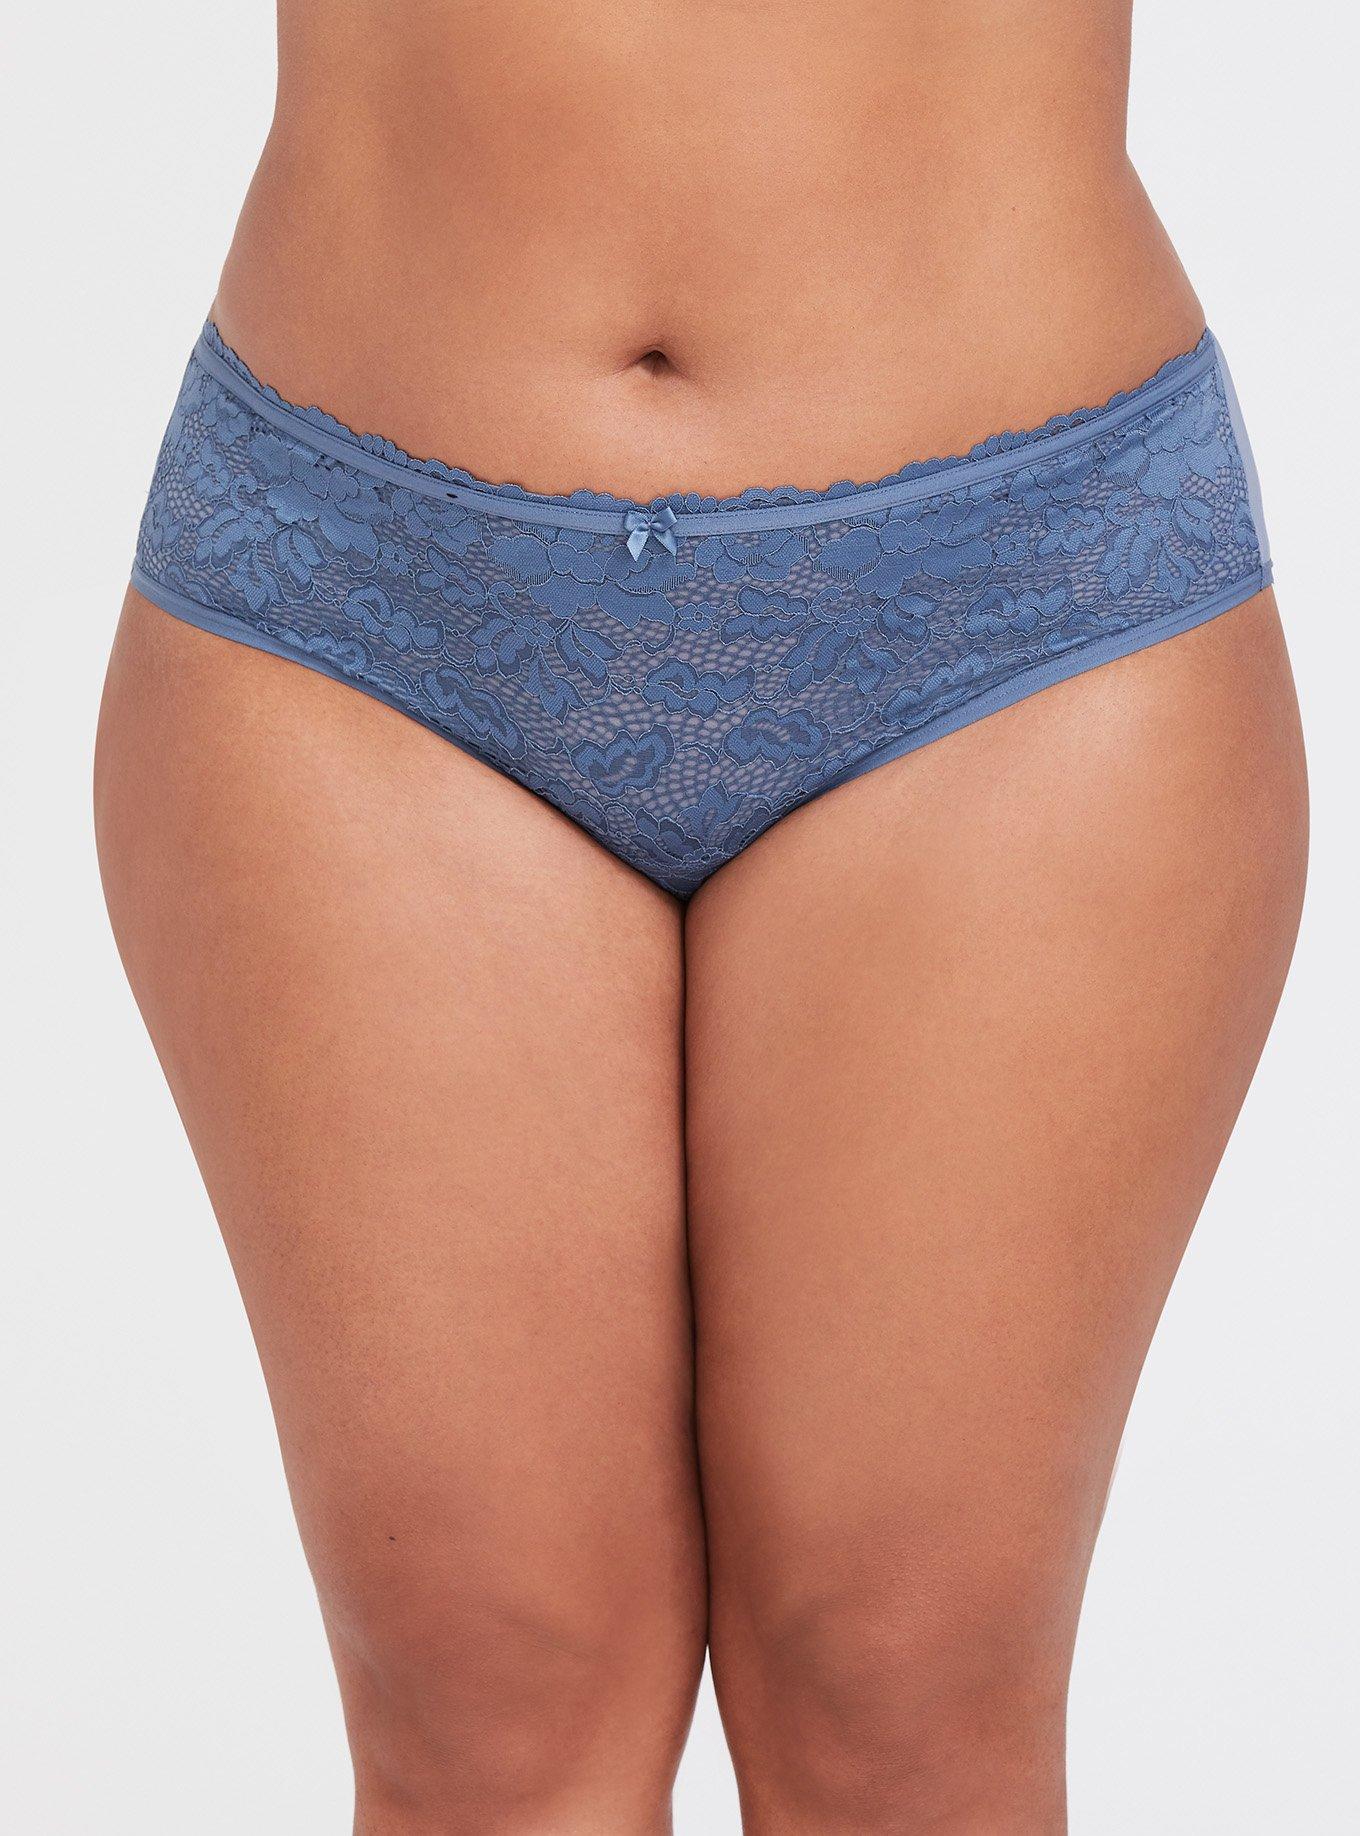 Plus Size - 4-Way Stretch Lace High-Rise Brief Panty - Torrid